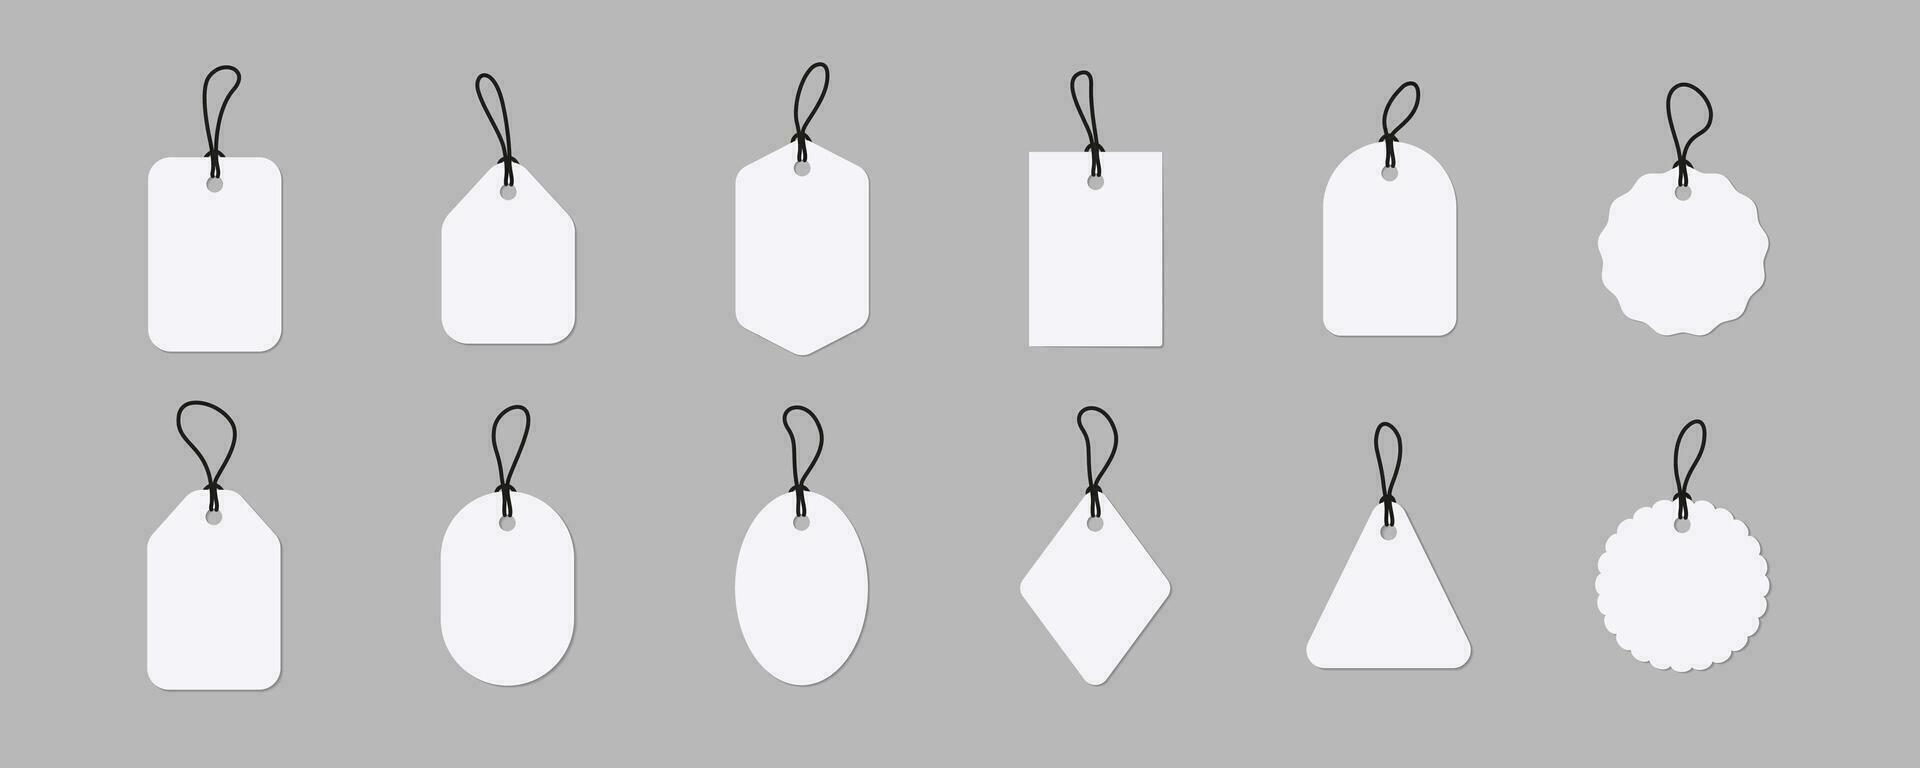 Set of blank icon mockups. Plain empty tag hanging on a rope. Vector illustration